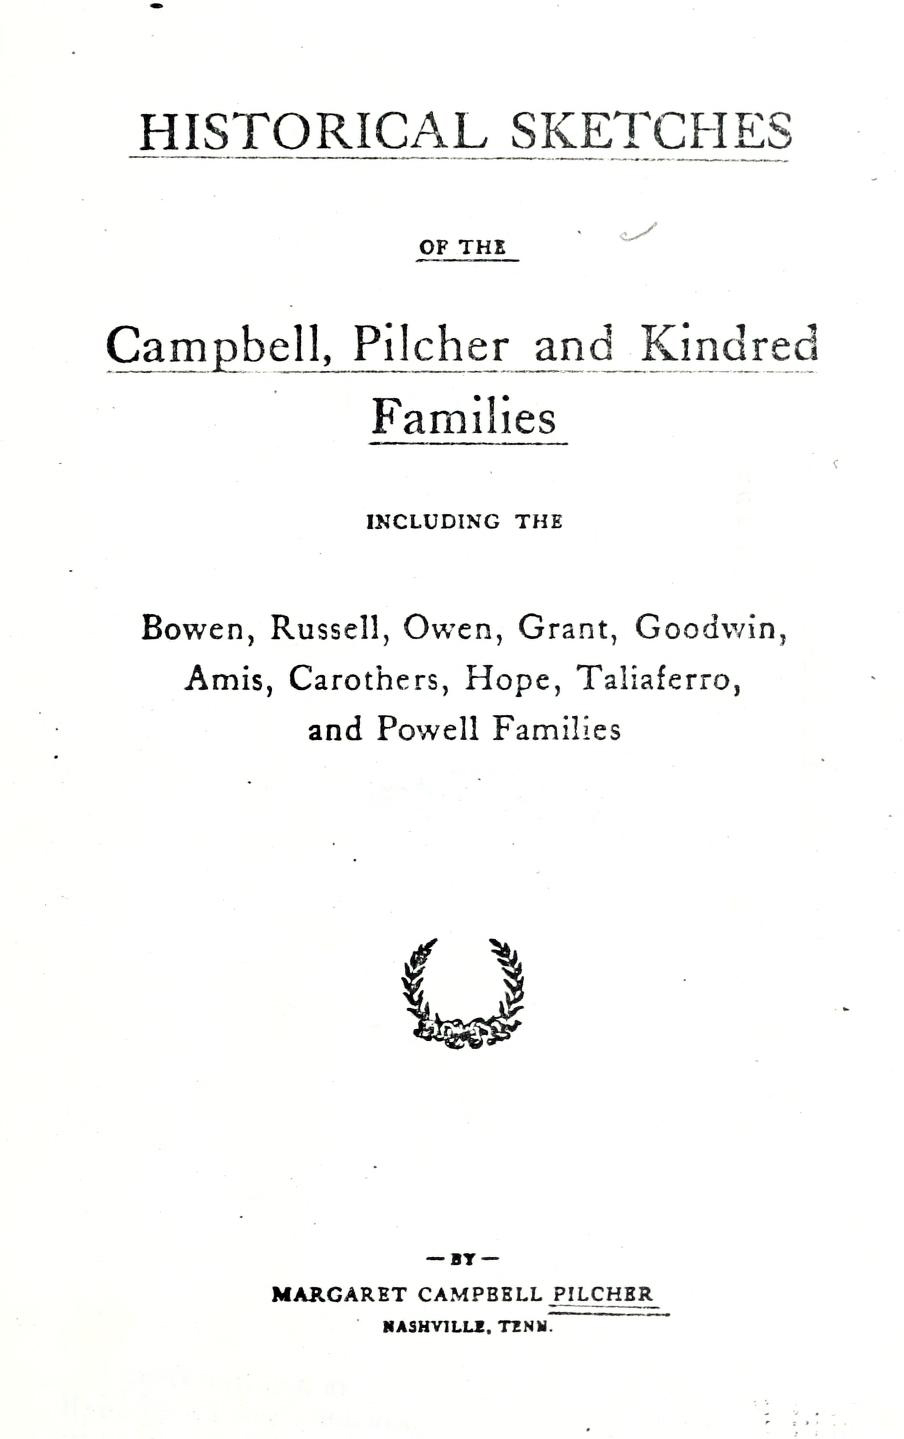 Historical Sketches of the Campbell, Pilcher and Kindred Famililies